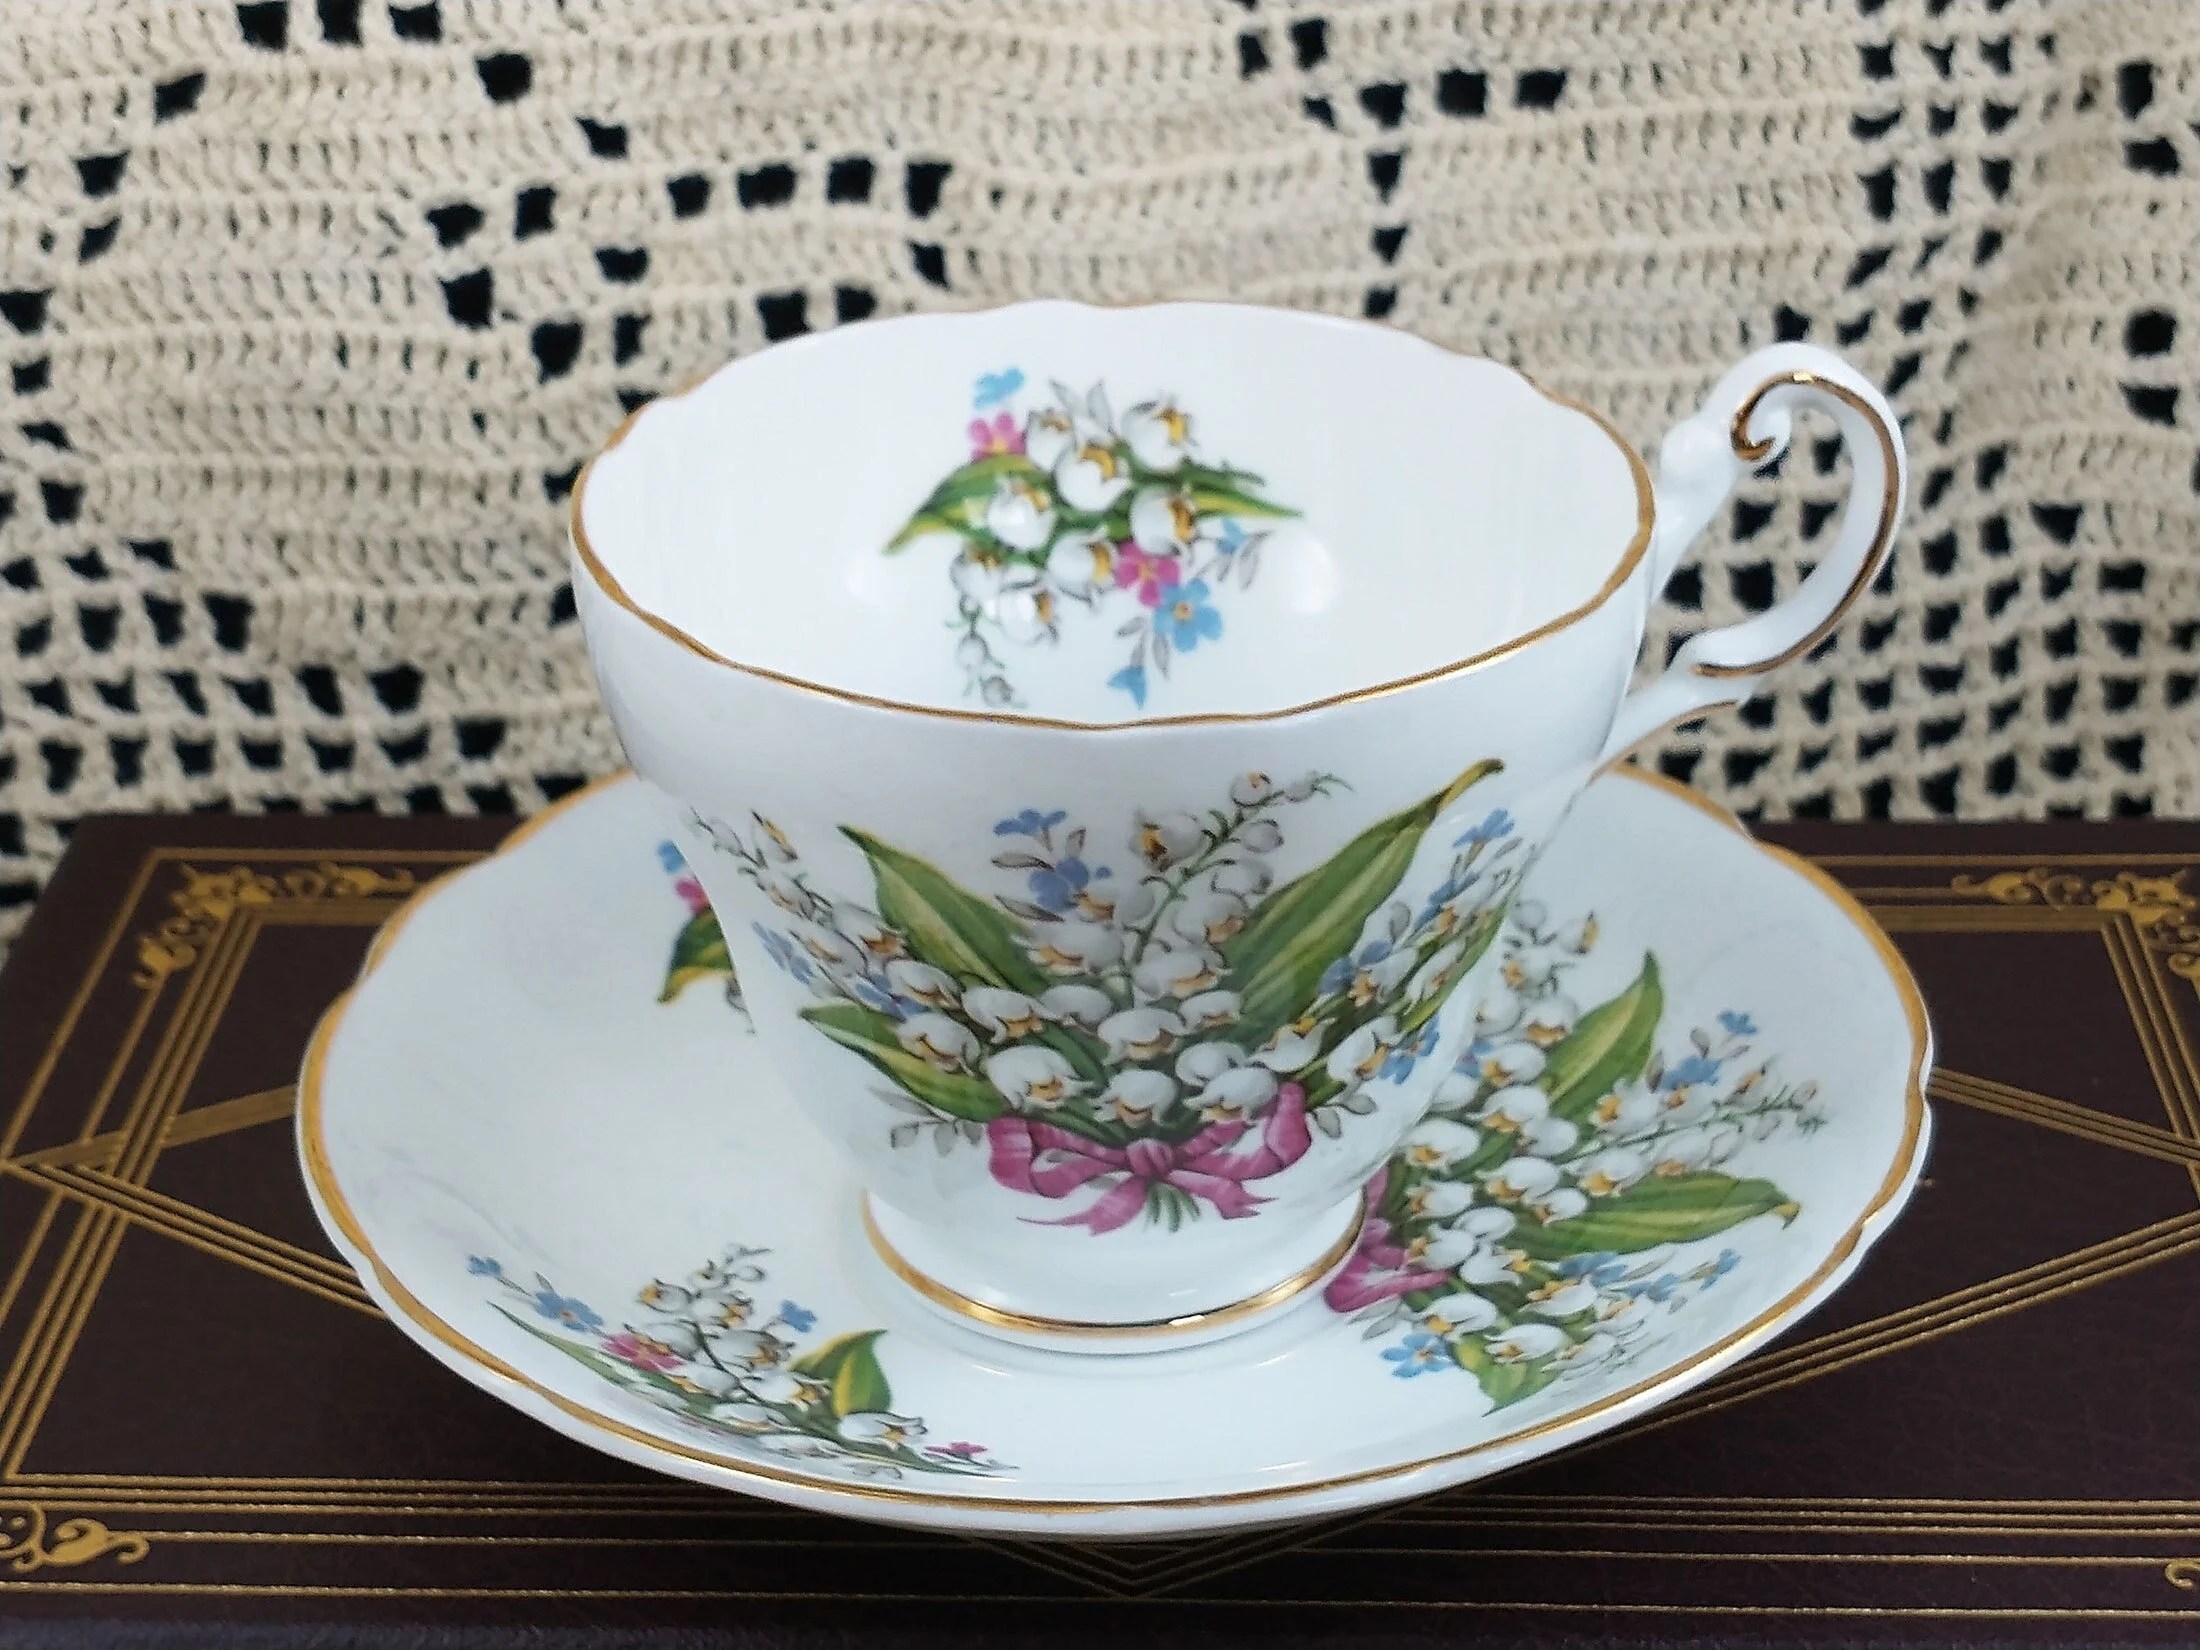 Regency Bone China England Lily of the Valley Floral Gold Trim Tea Cup & Saucer Set Longton Stoke on Trent - Farmhouse, Country, Cottage